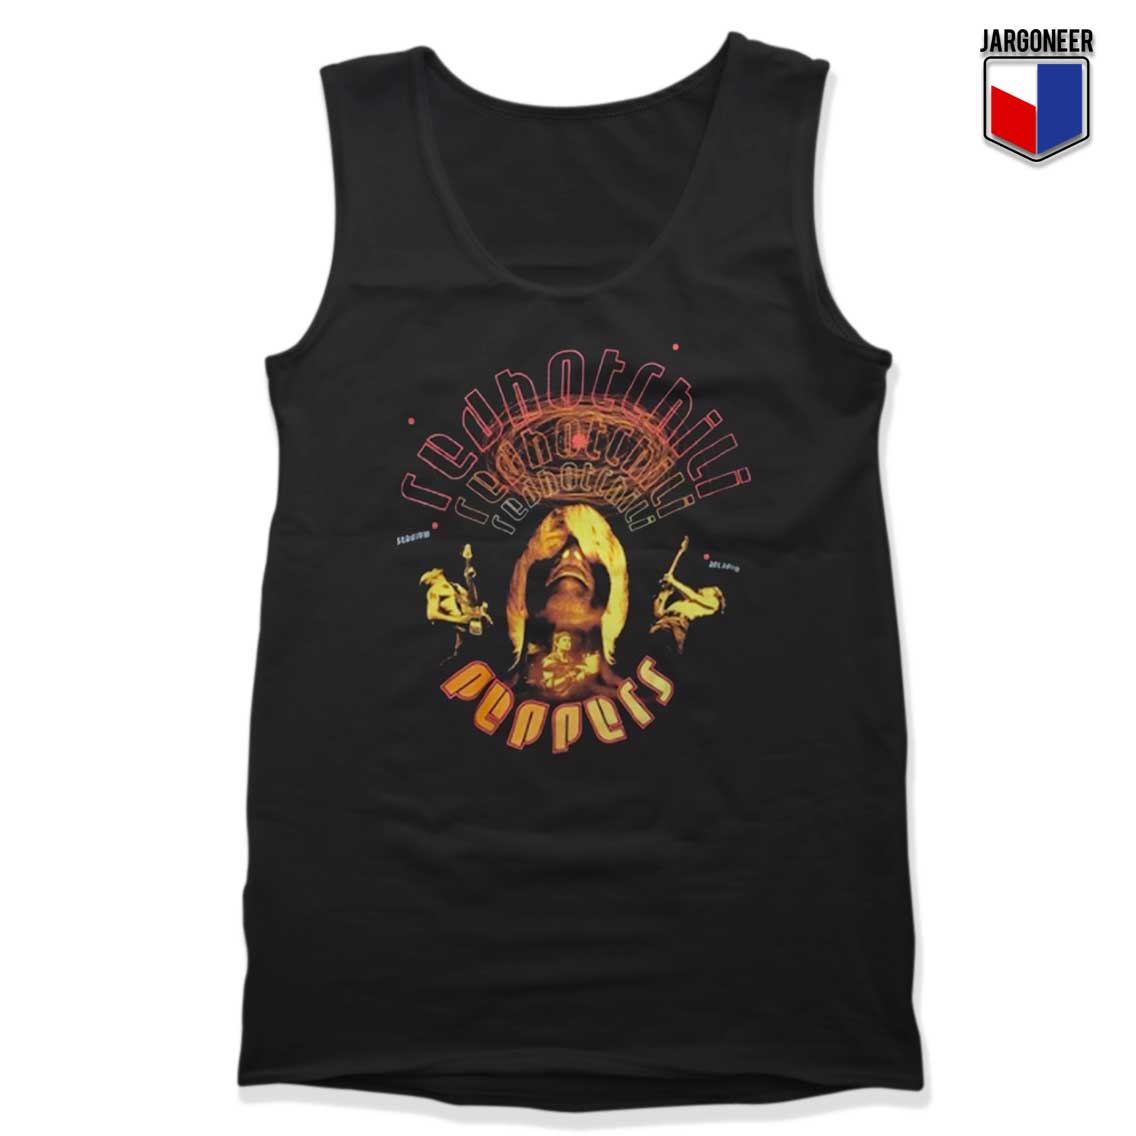 Red Hot Chili Peppers Tank Top - Shop Unique Graphic Cool Shirt Designs